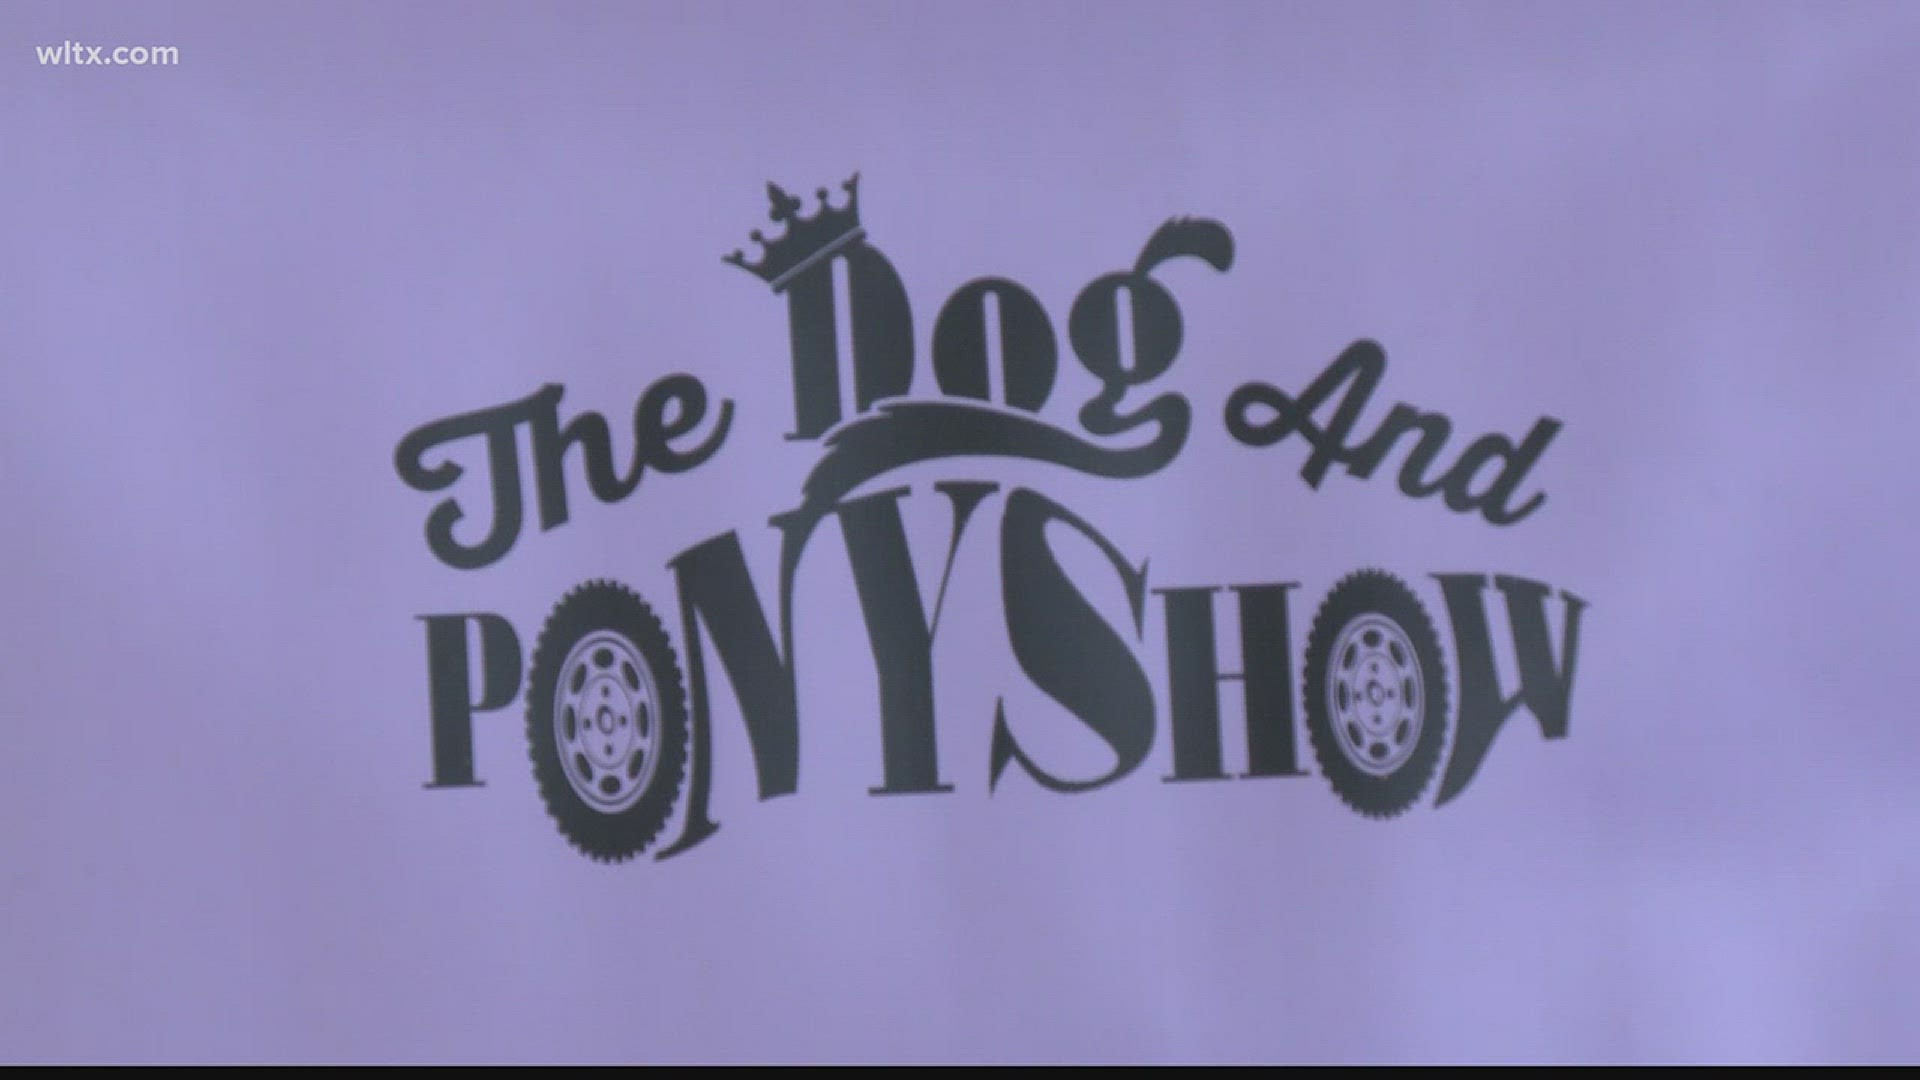 News19 Photojournalist Paul Harris captured the sights and sounds of the 3rd Annual Dog and Pony Show.